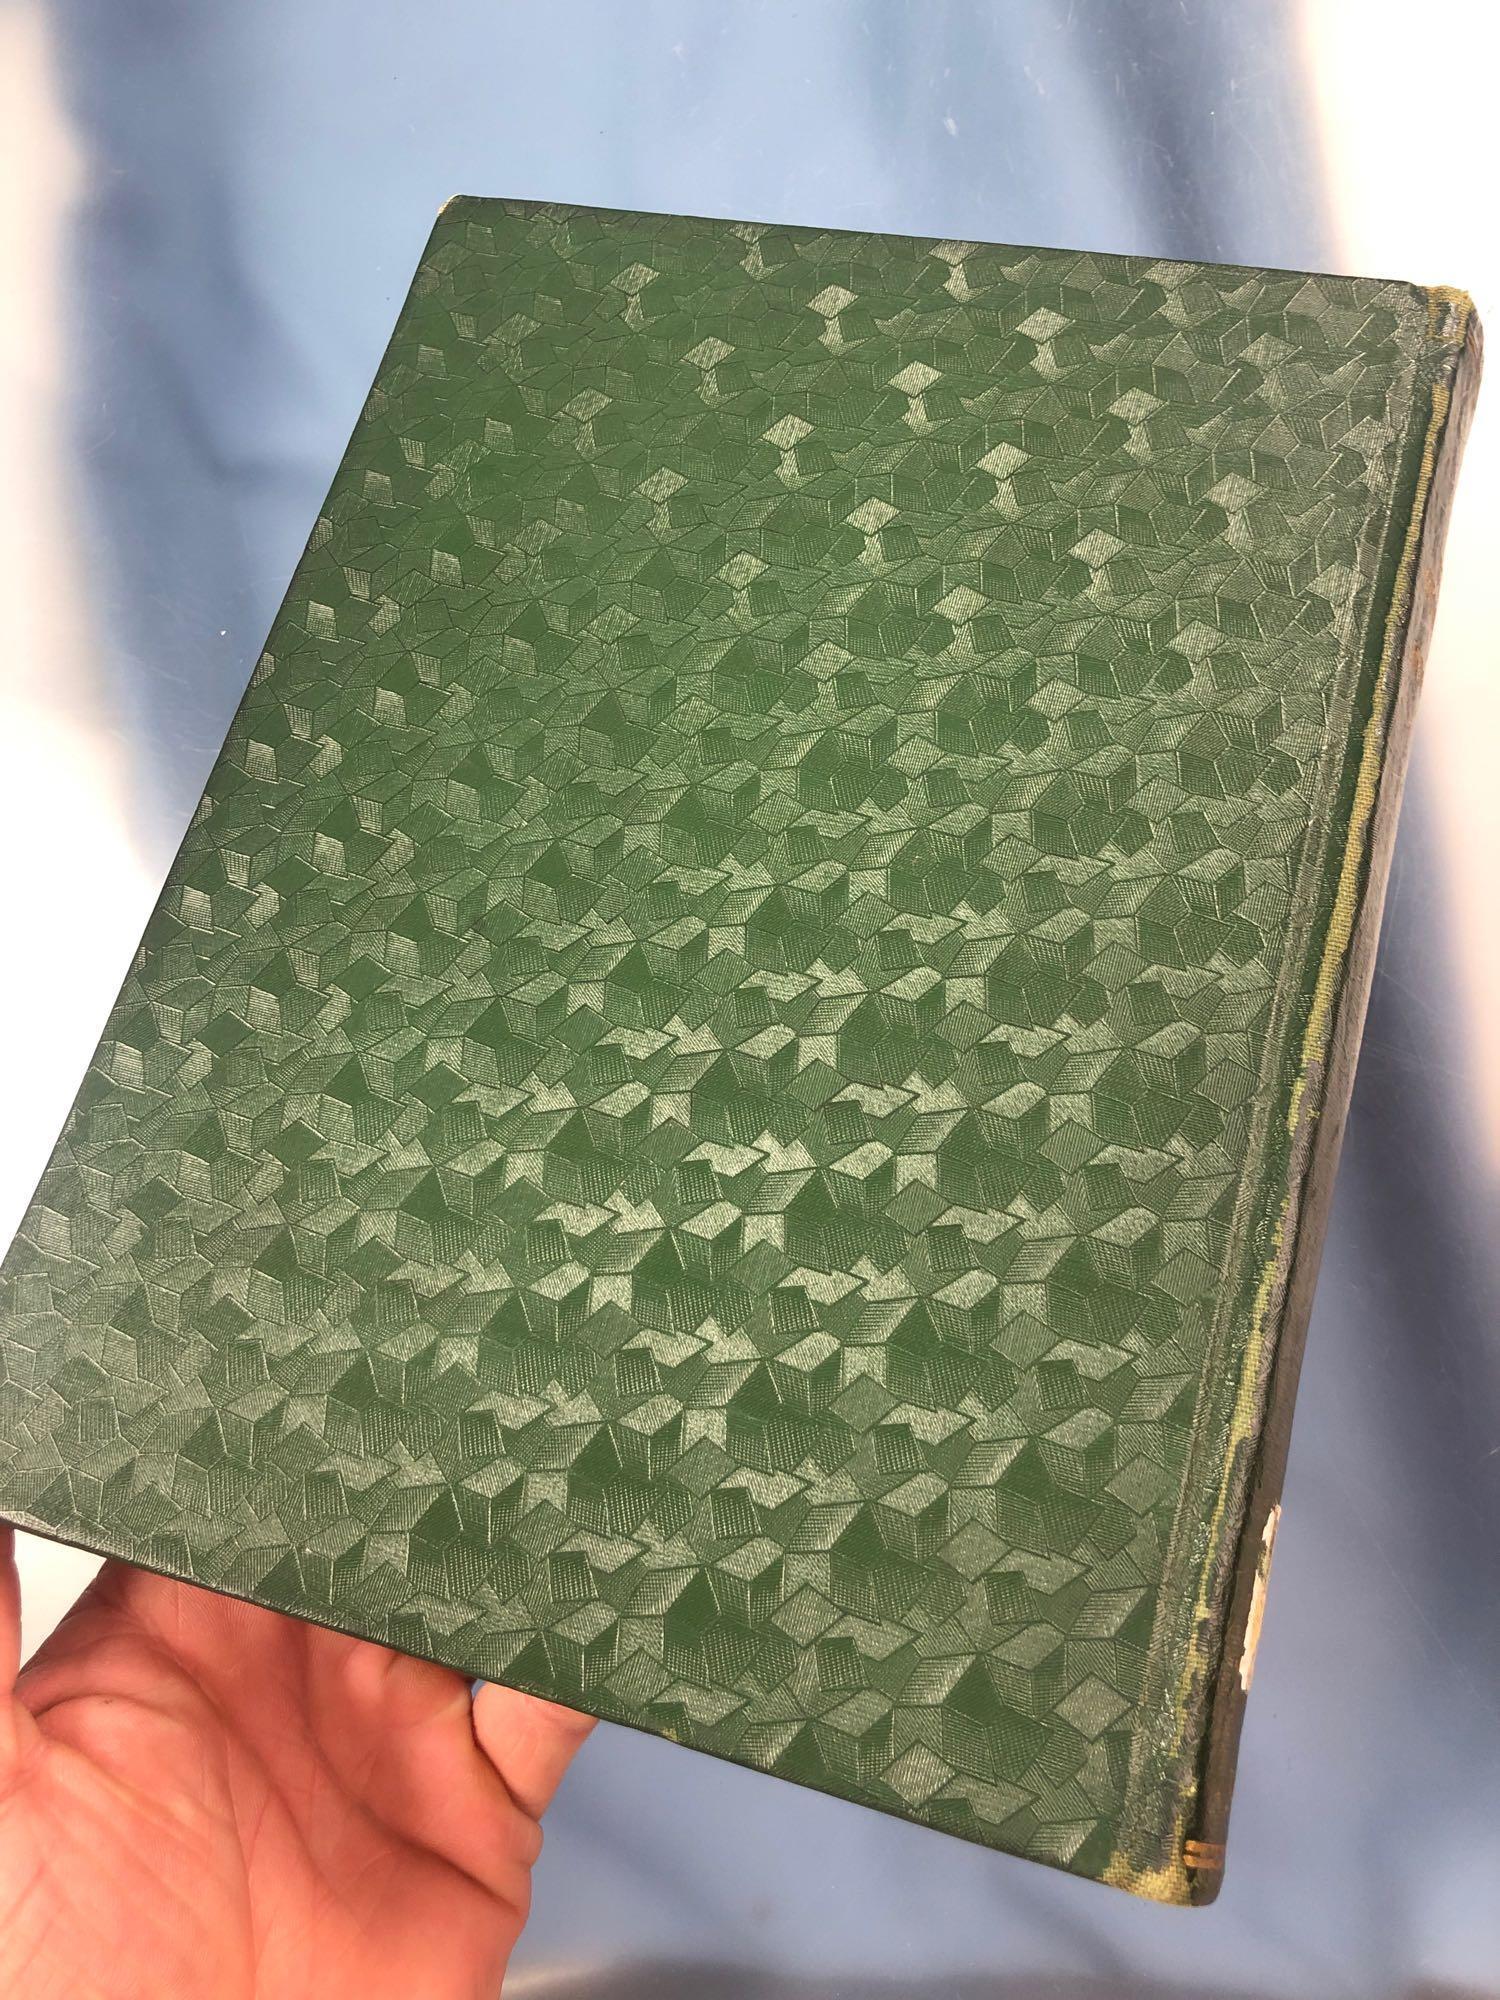 Extremely Rare 1917 Moorehead's "Stone Ornaments" Vintage Book